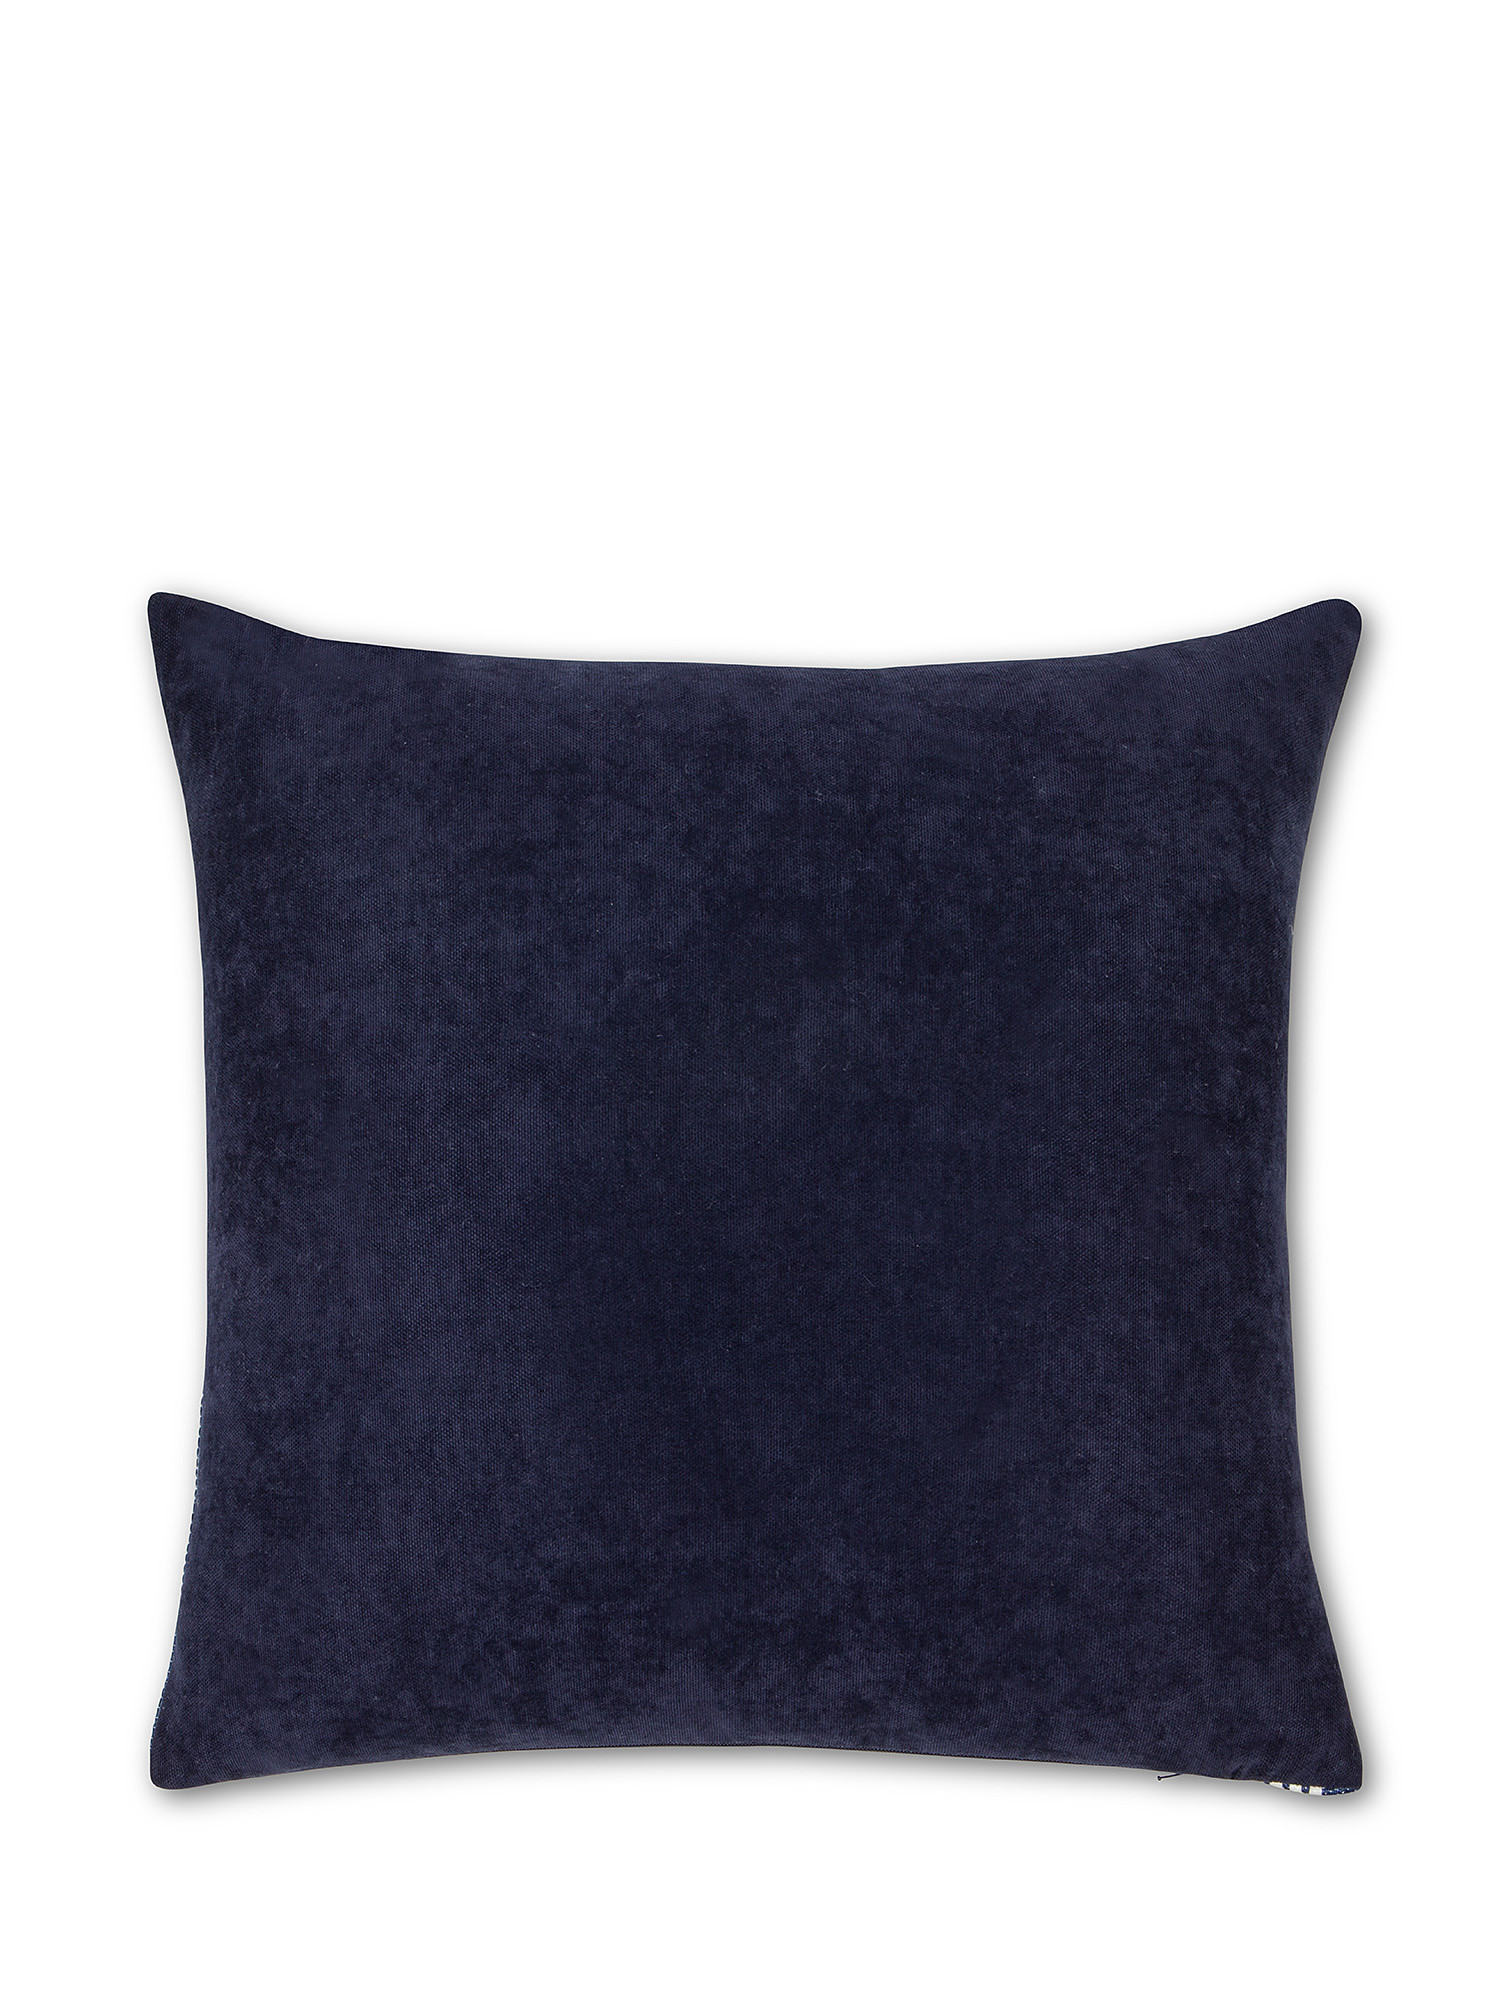 43x43 cm cushion in cotton and linen, Blue, large image number 1